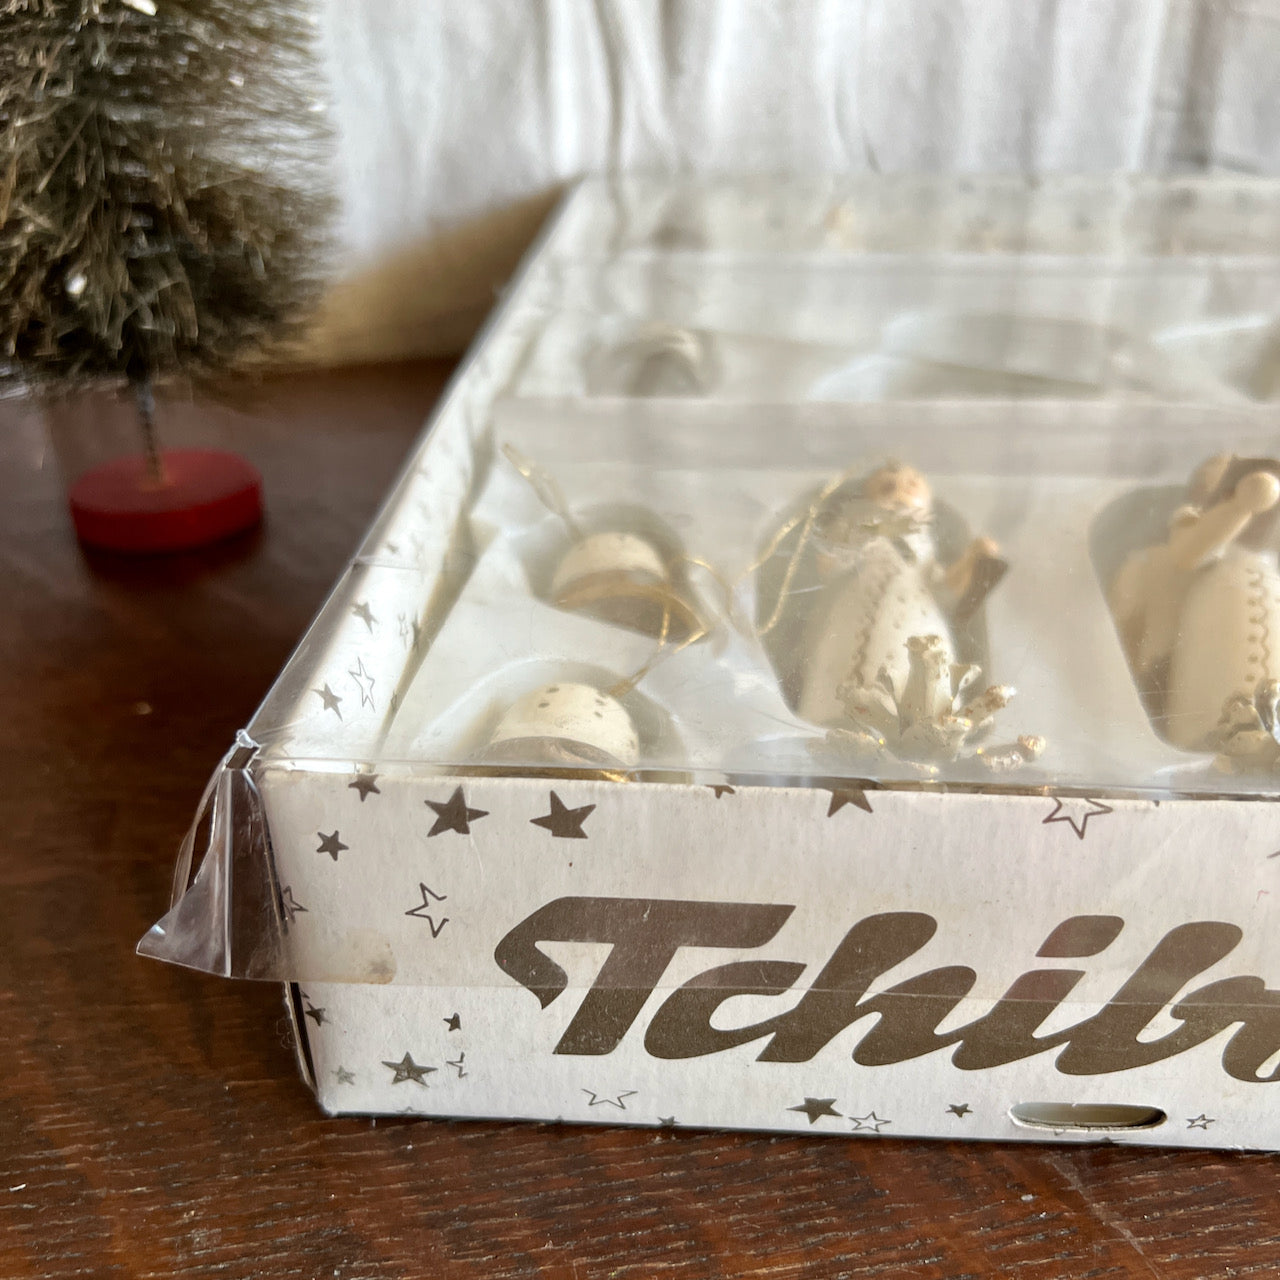 Set of 30 German Wooden Ornaments by Tchibo (c.1970s)